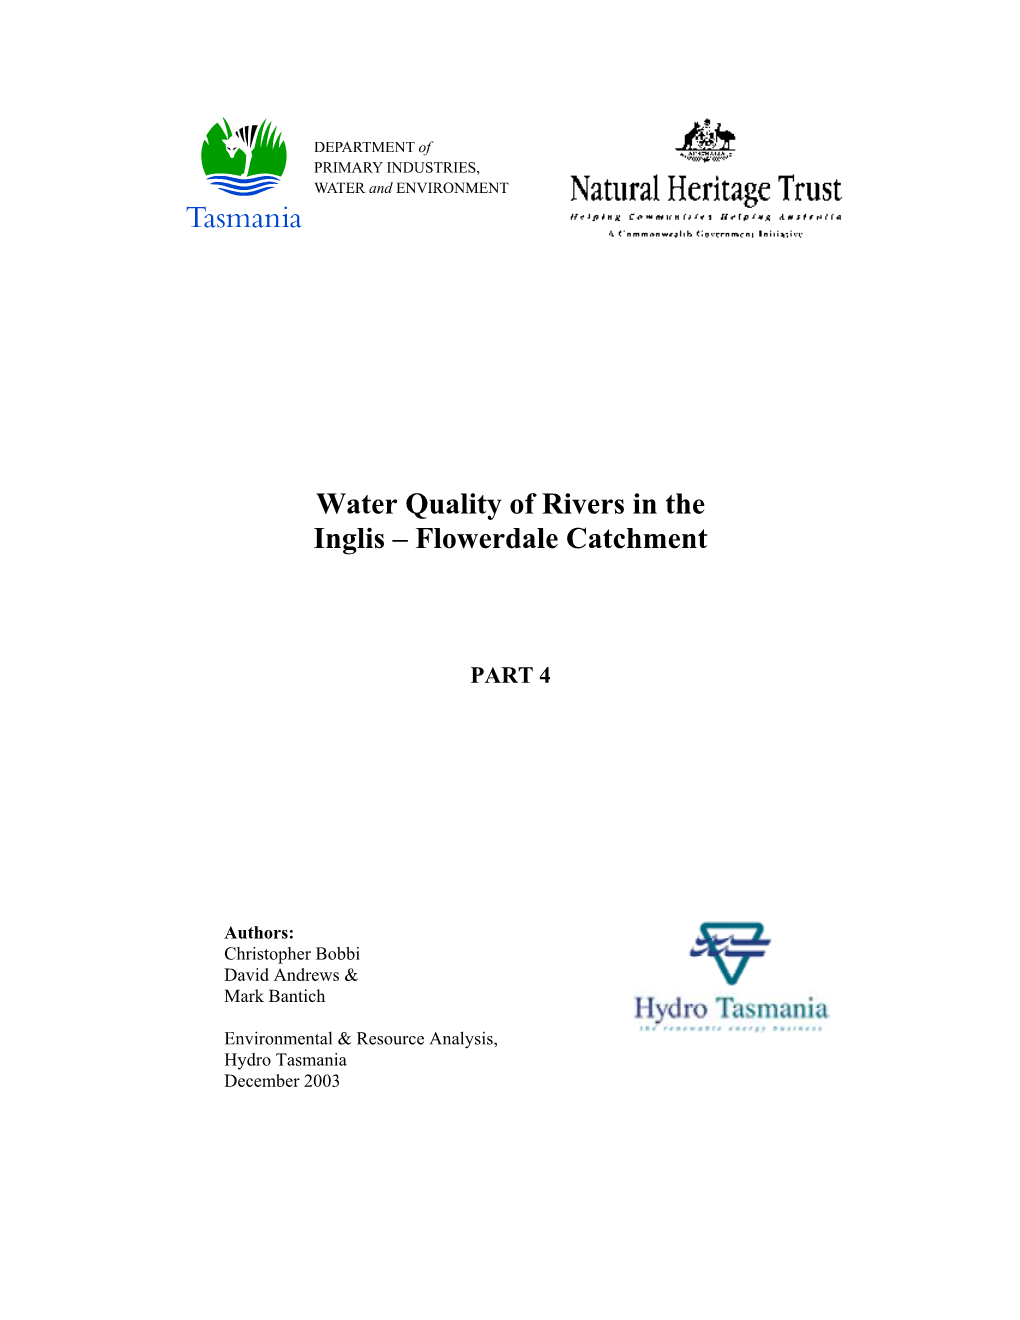 Water Quality of Rivers in the Inglis – Flowerdale Catchment